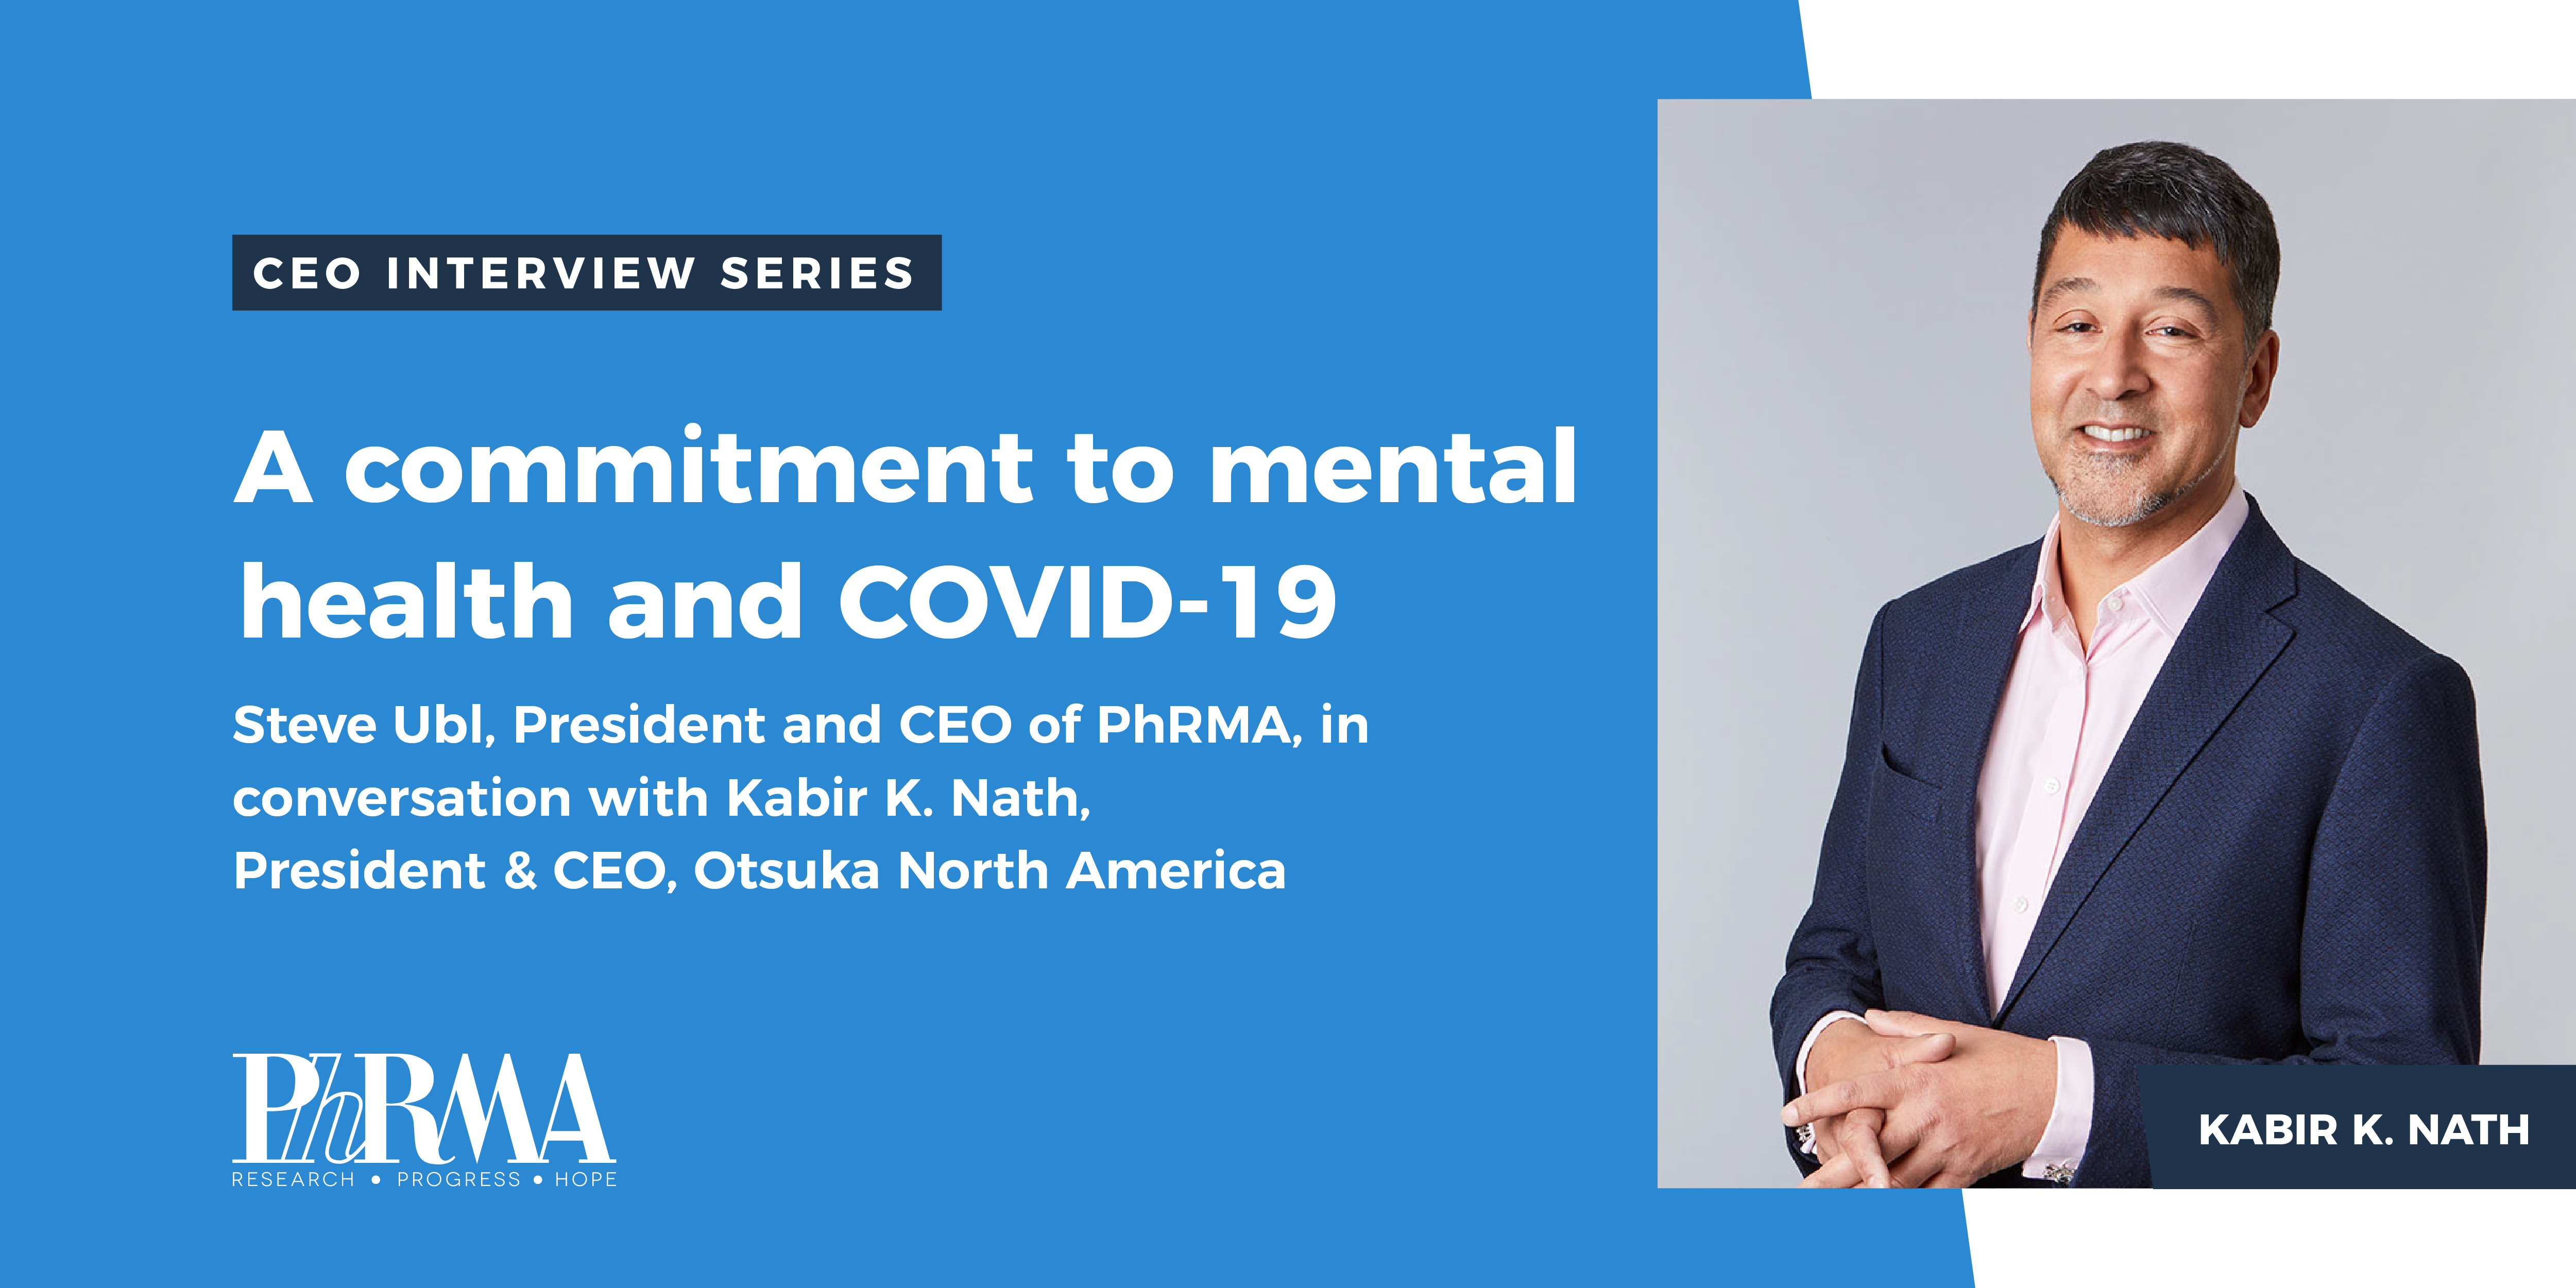 coming-together-to-fight-covid-19-a-conversation-with-kabir-k-nath-president-ceo-of-otsuka-north-america-pharmaceutical-business